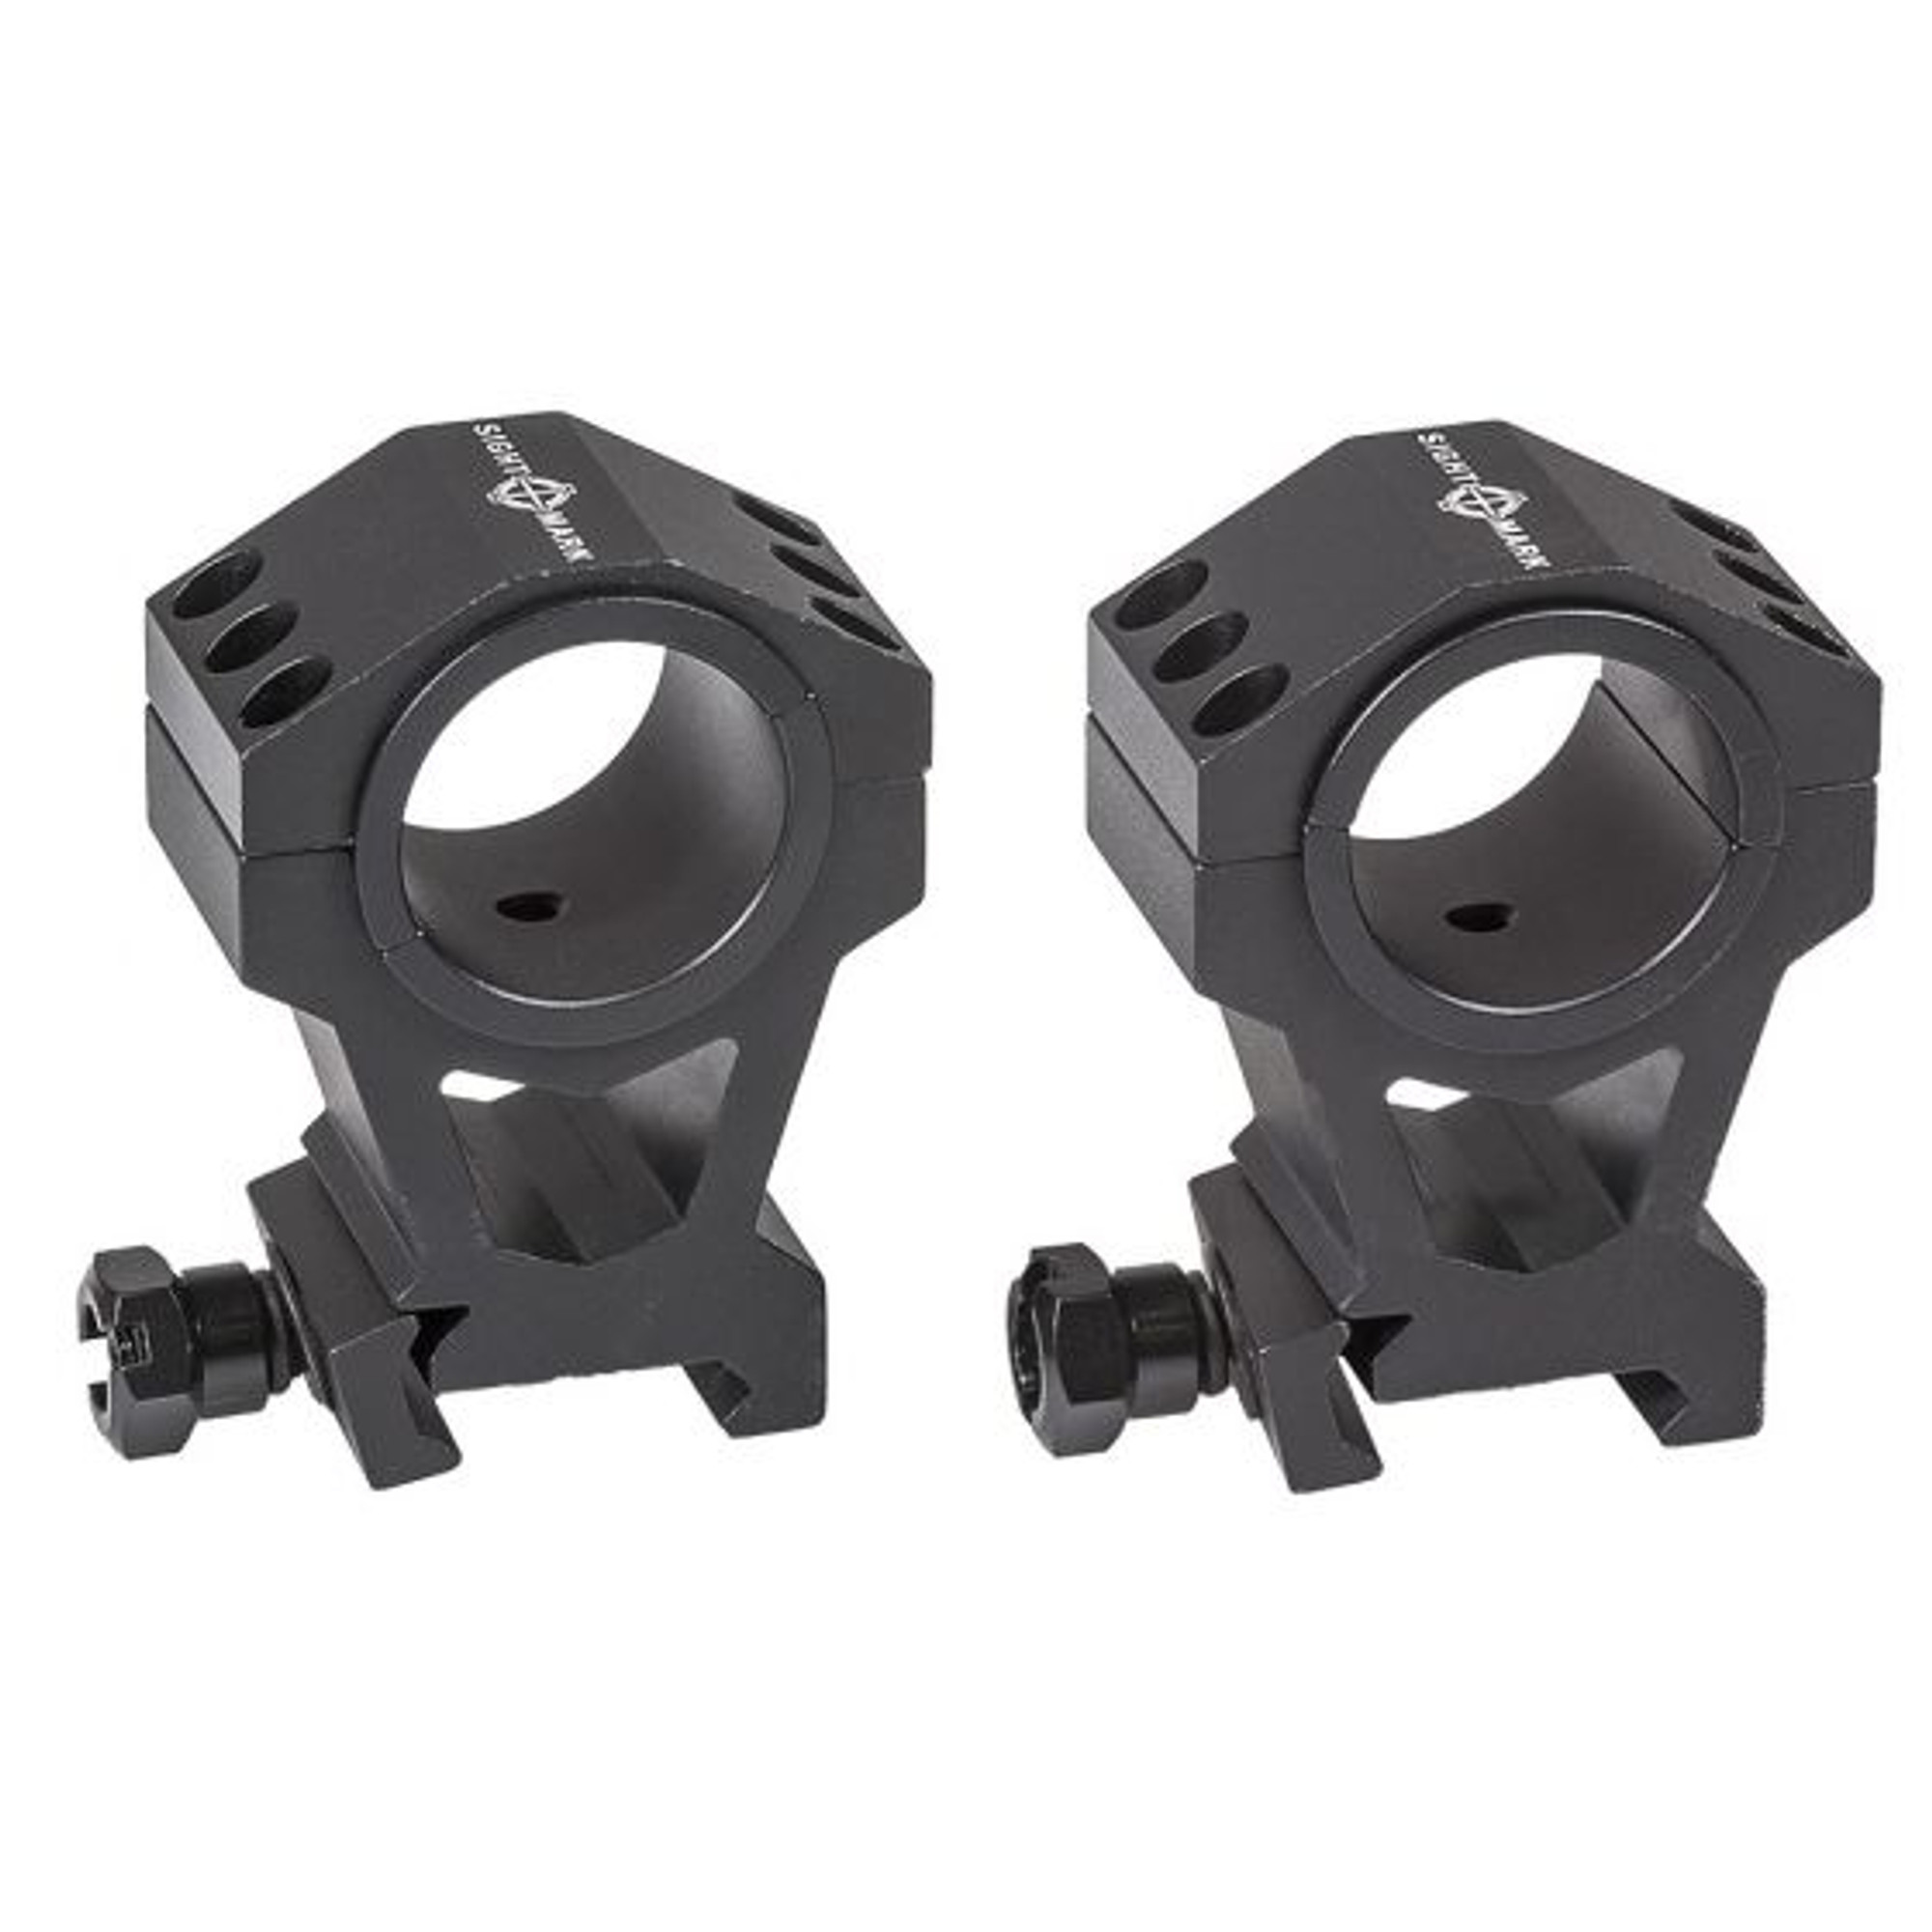 Sightmark Tactical Mounting Rings - Extra-High Height Picatinny Rings (fits 30mm & 1inch)